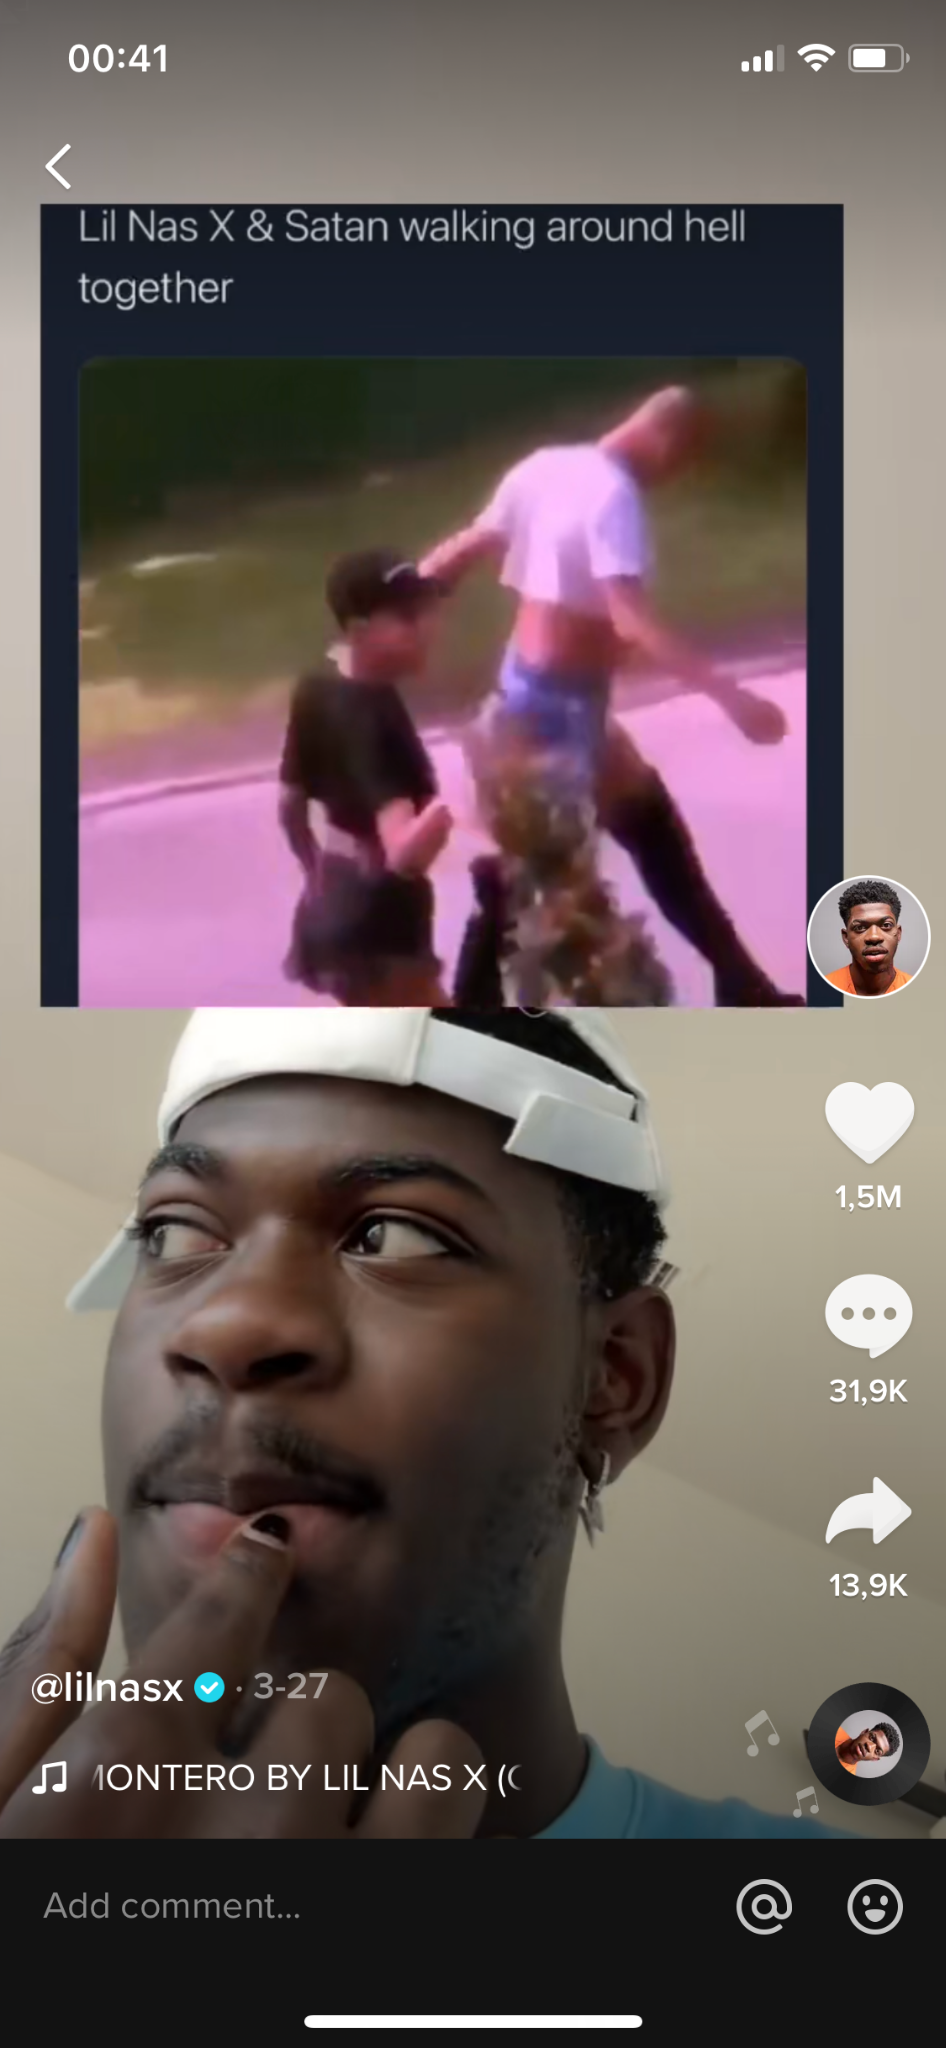 Another viral marketing technique by Lil Nas X